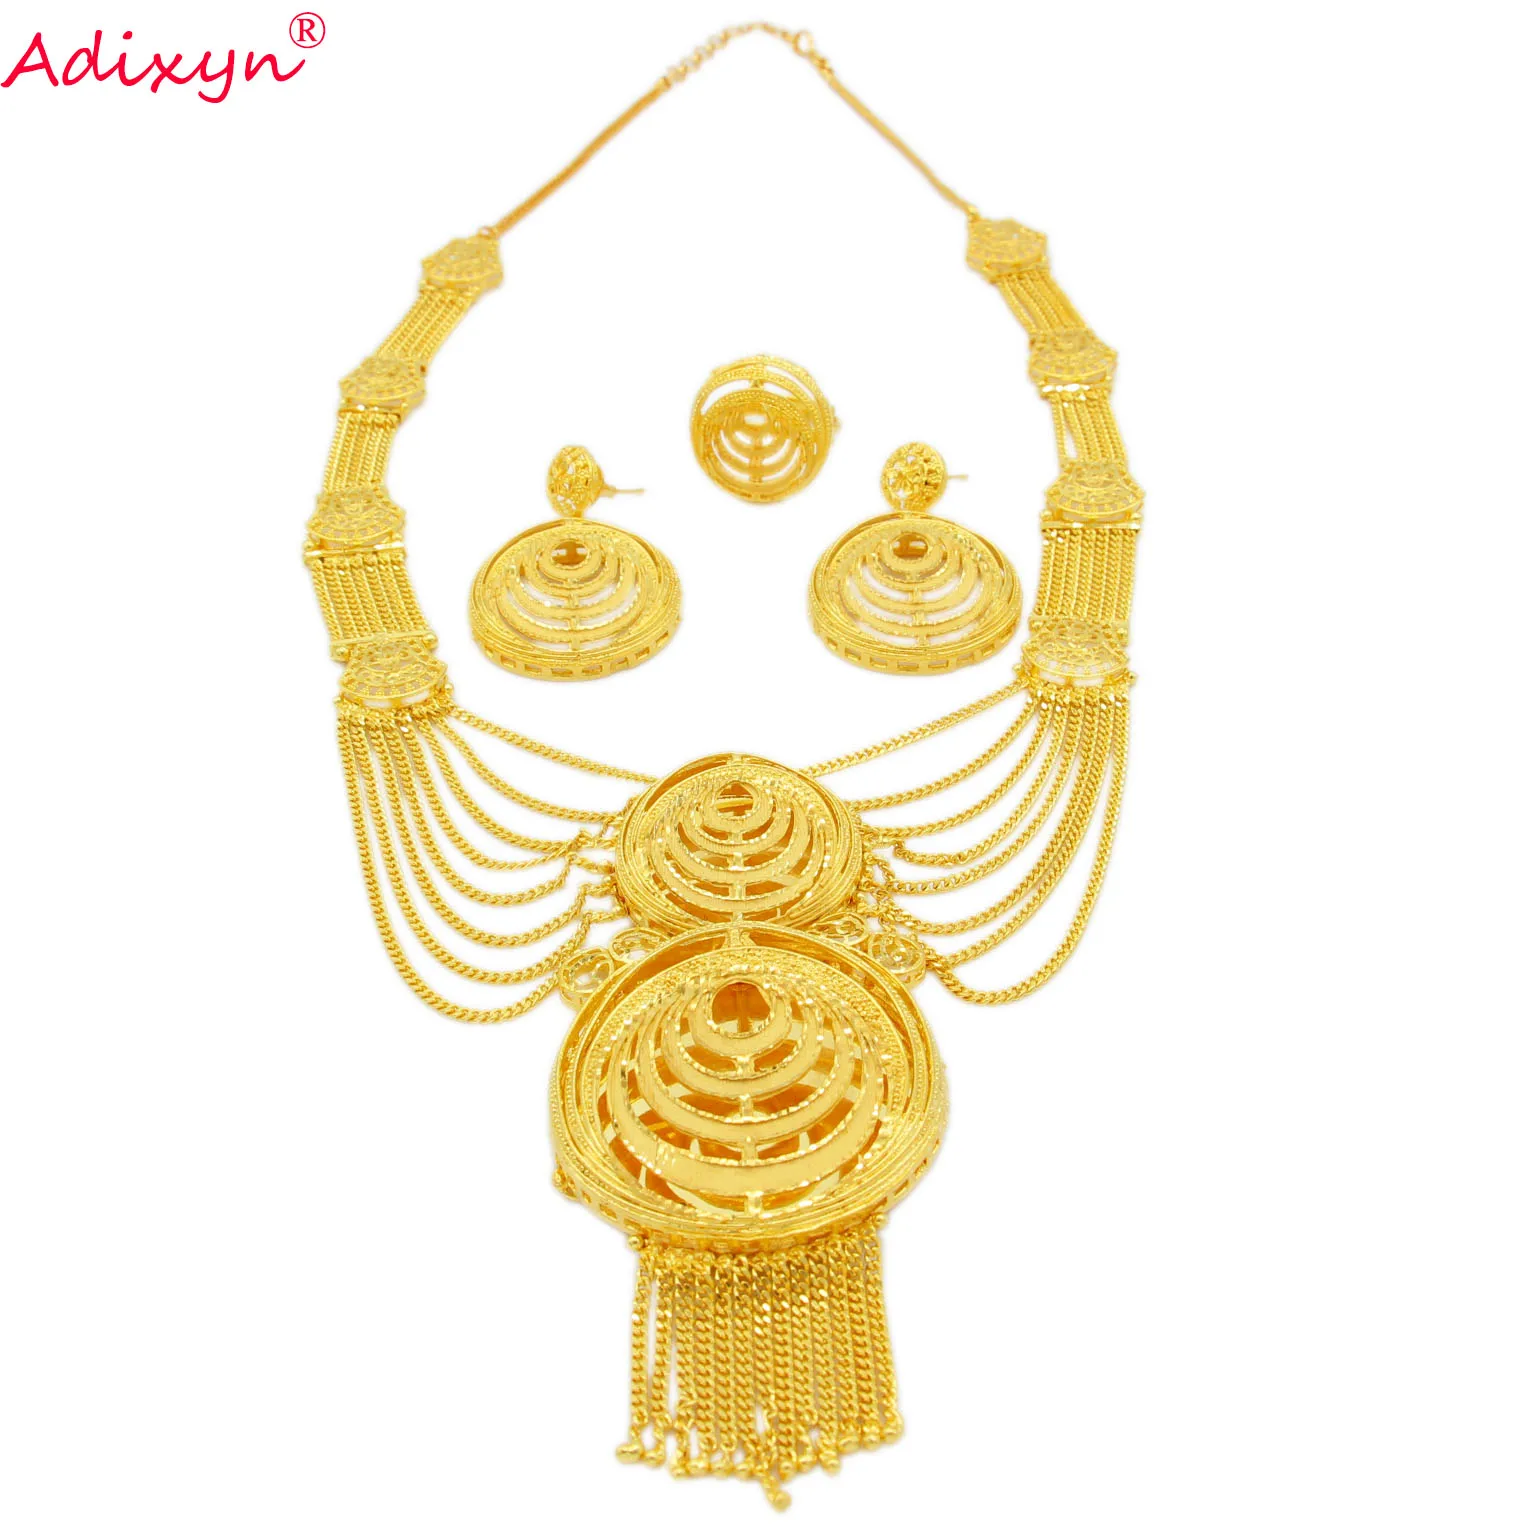 Adixyn Dubai 24K Gold Color Jewellry Set for Women India African Bridal Wedding Gifts Tassles Necklace/Earrings/Ring Set N122717